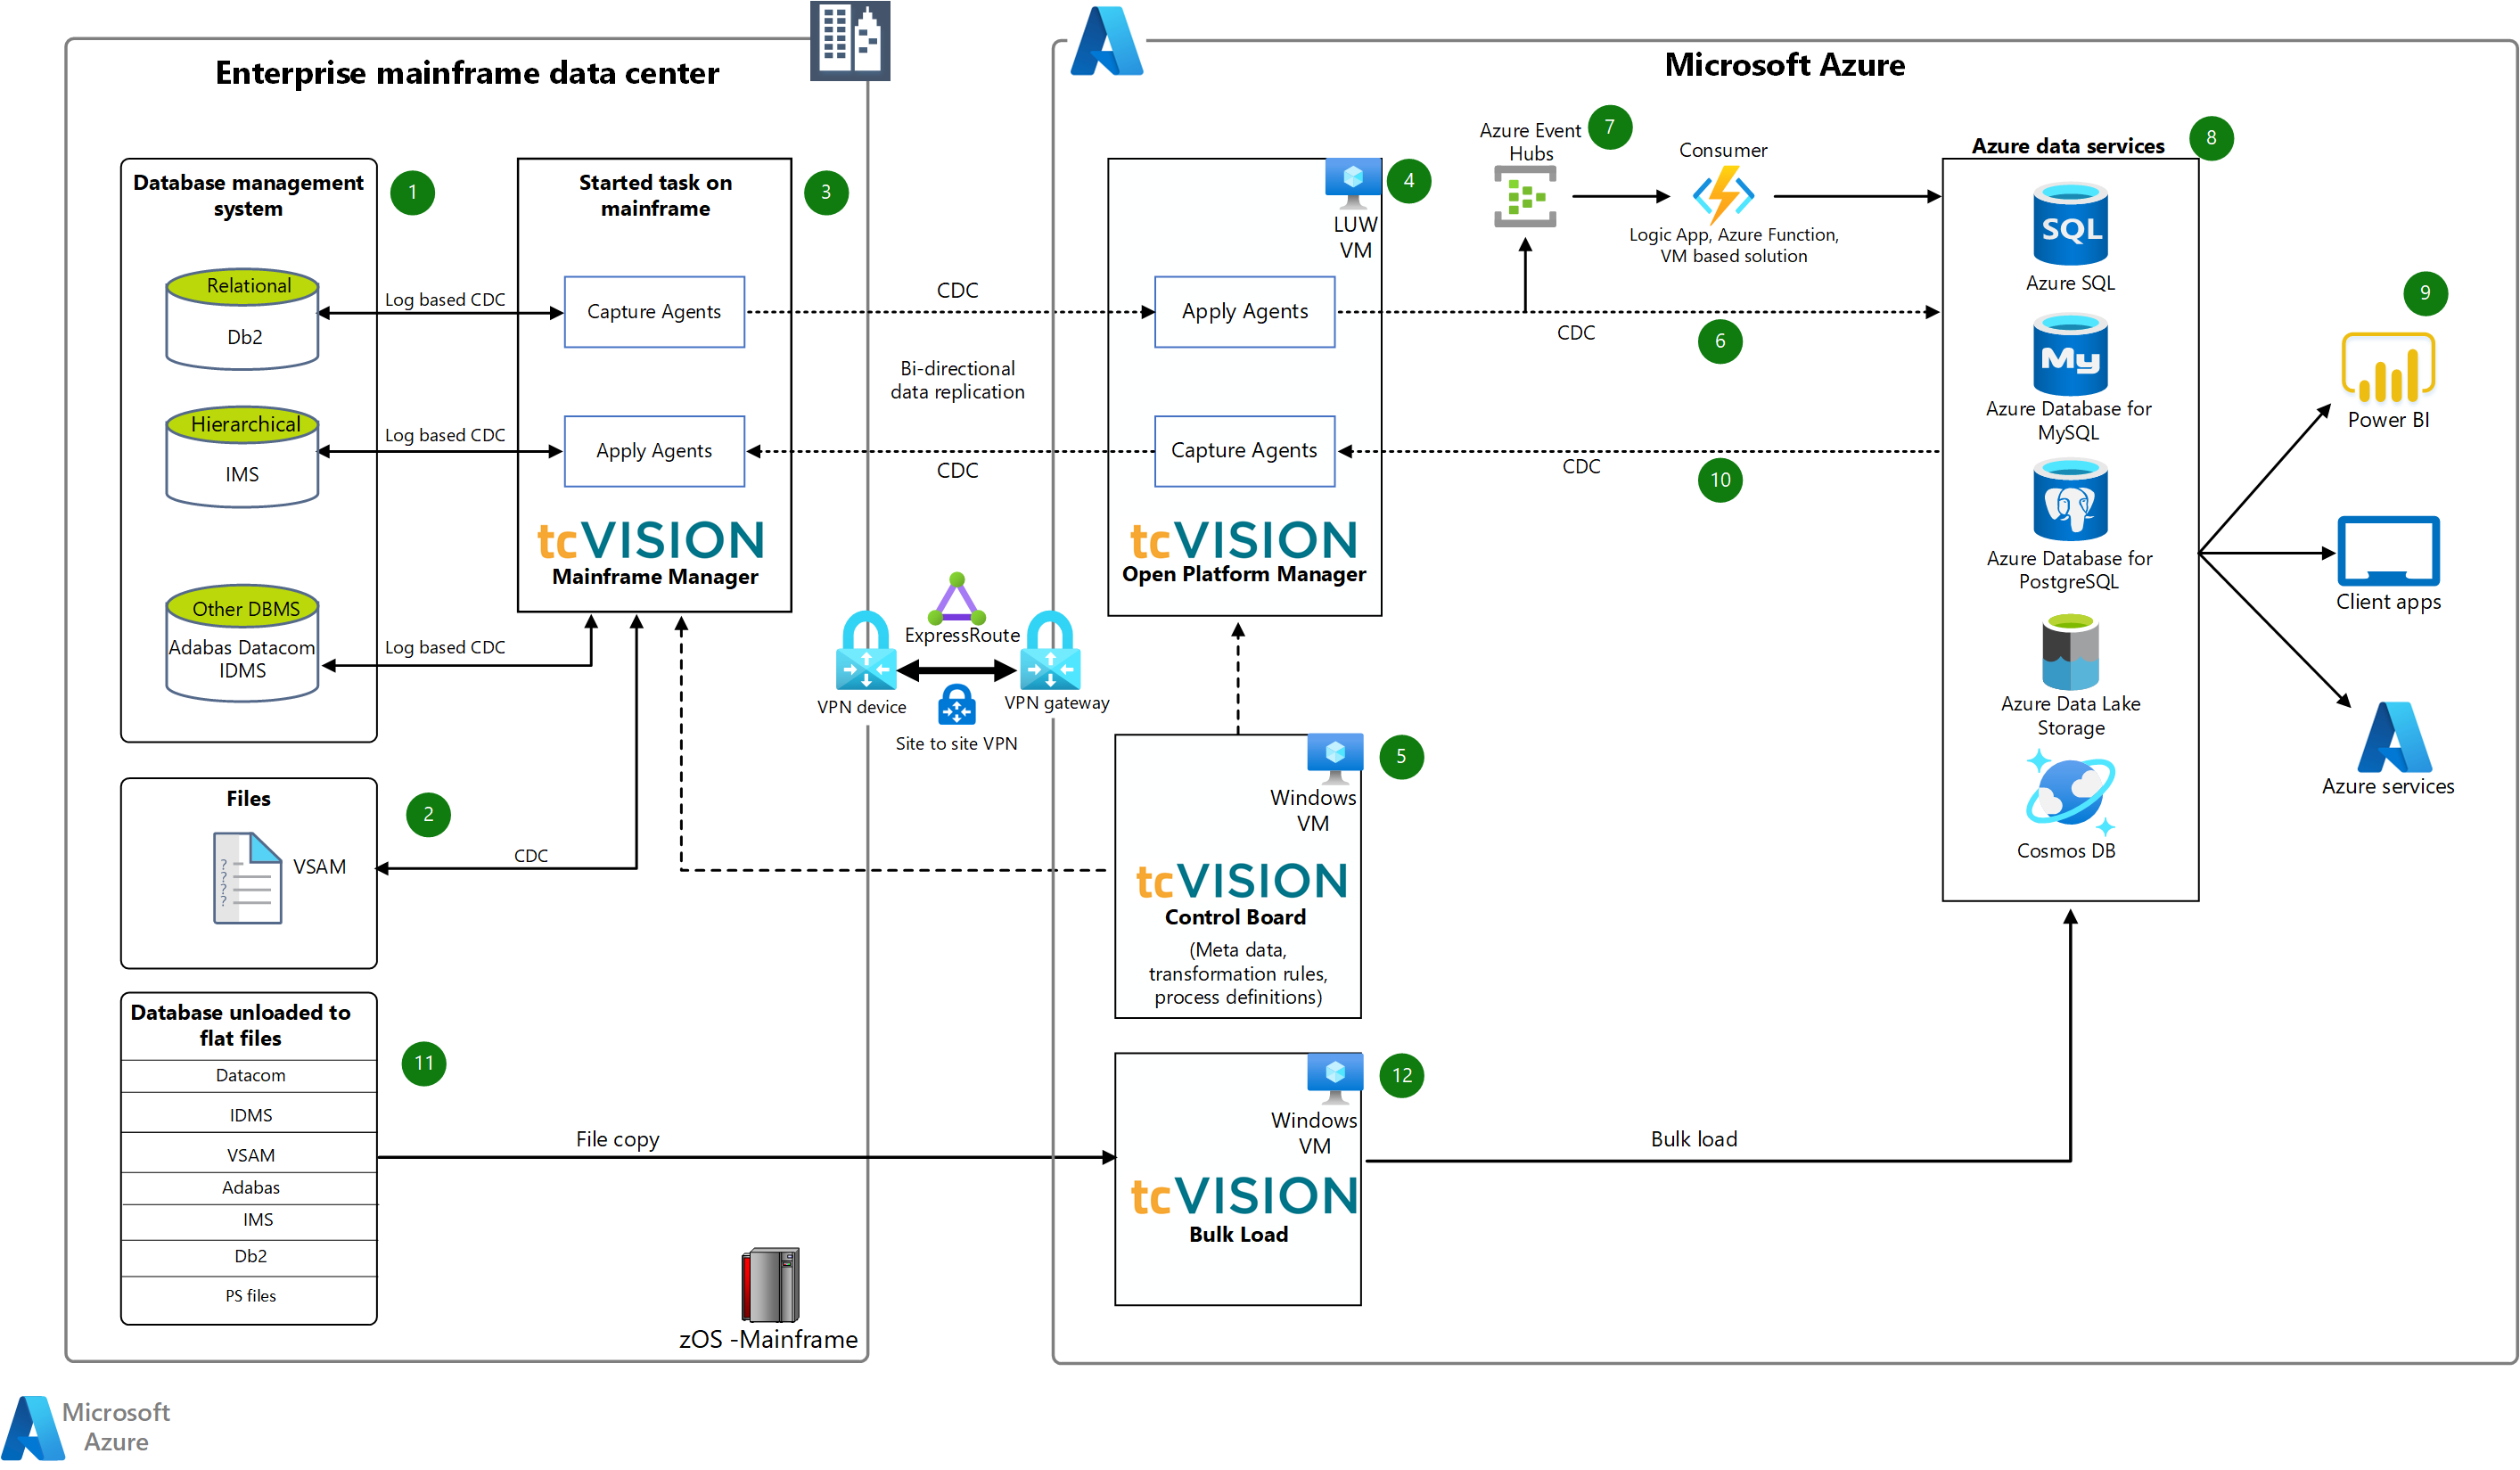 Architecture diagram of the data flow in migrating mainframe to Azure data platform.